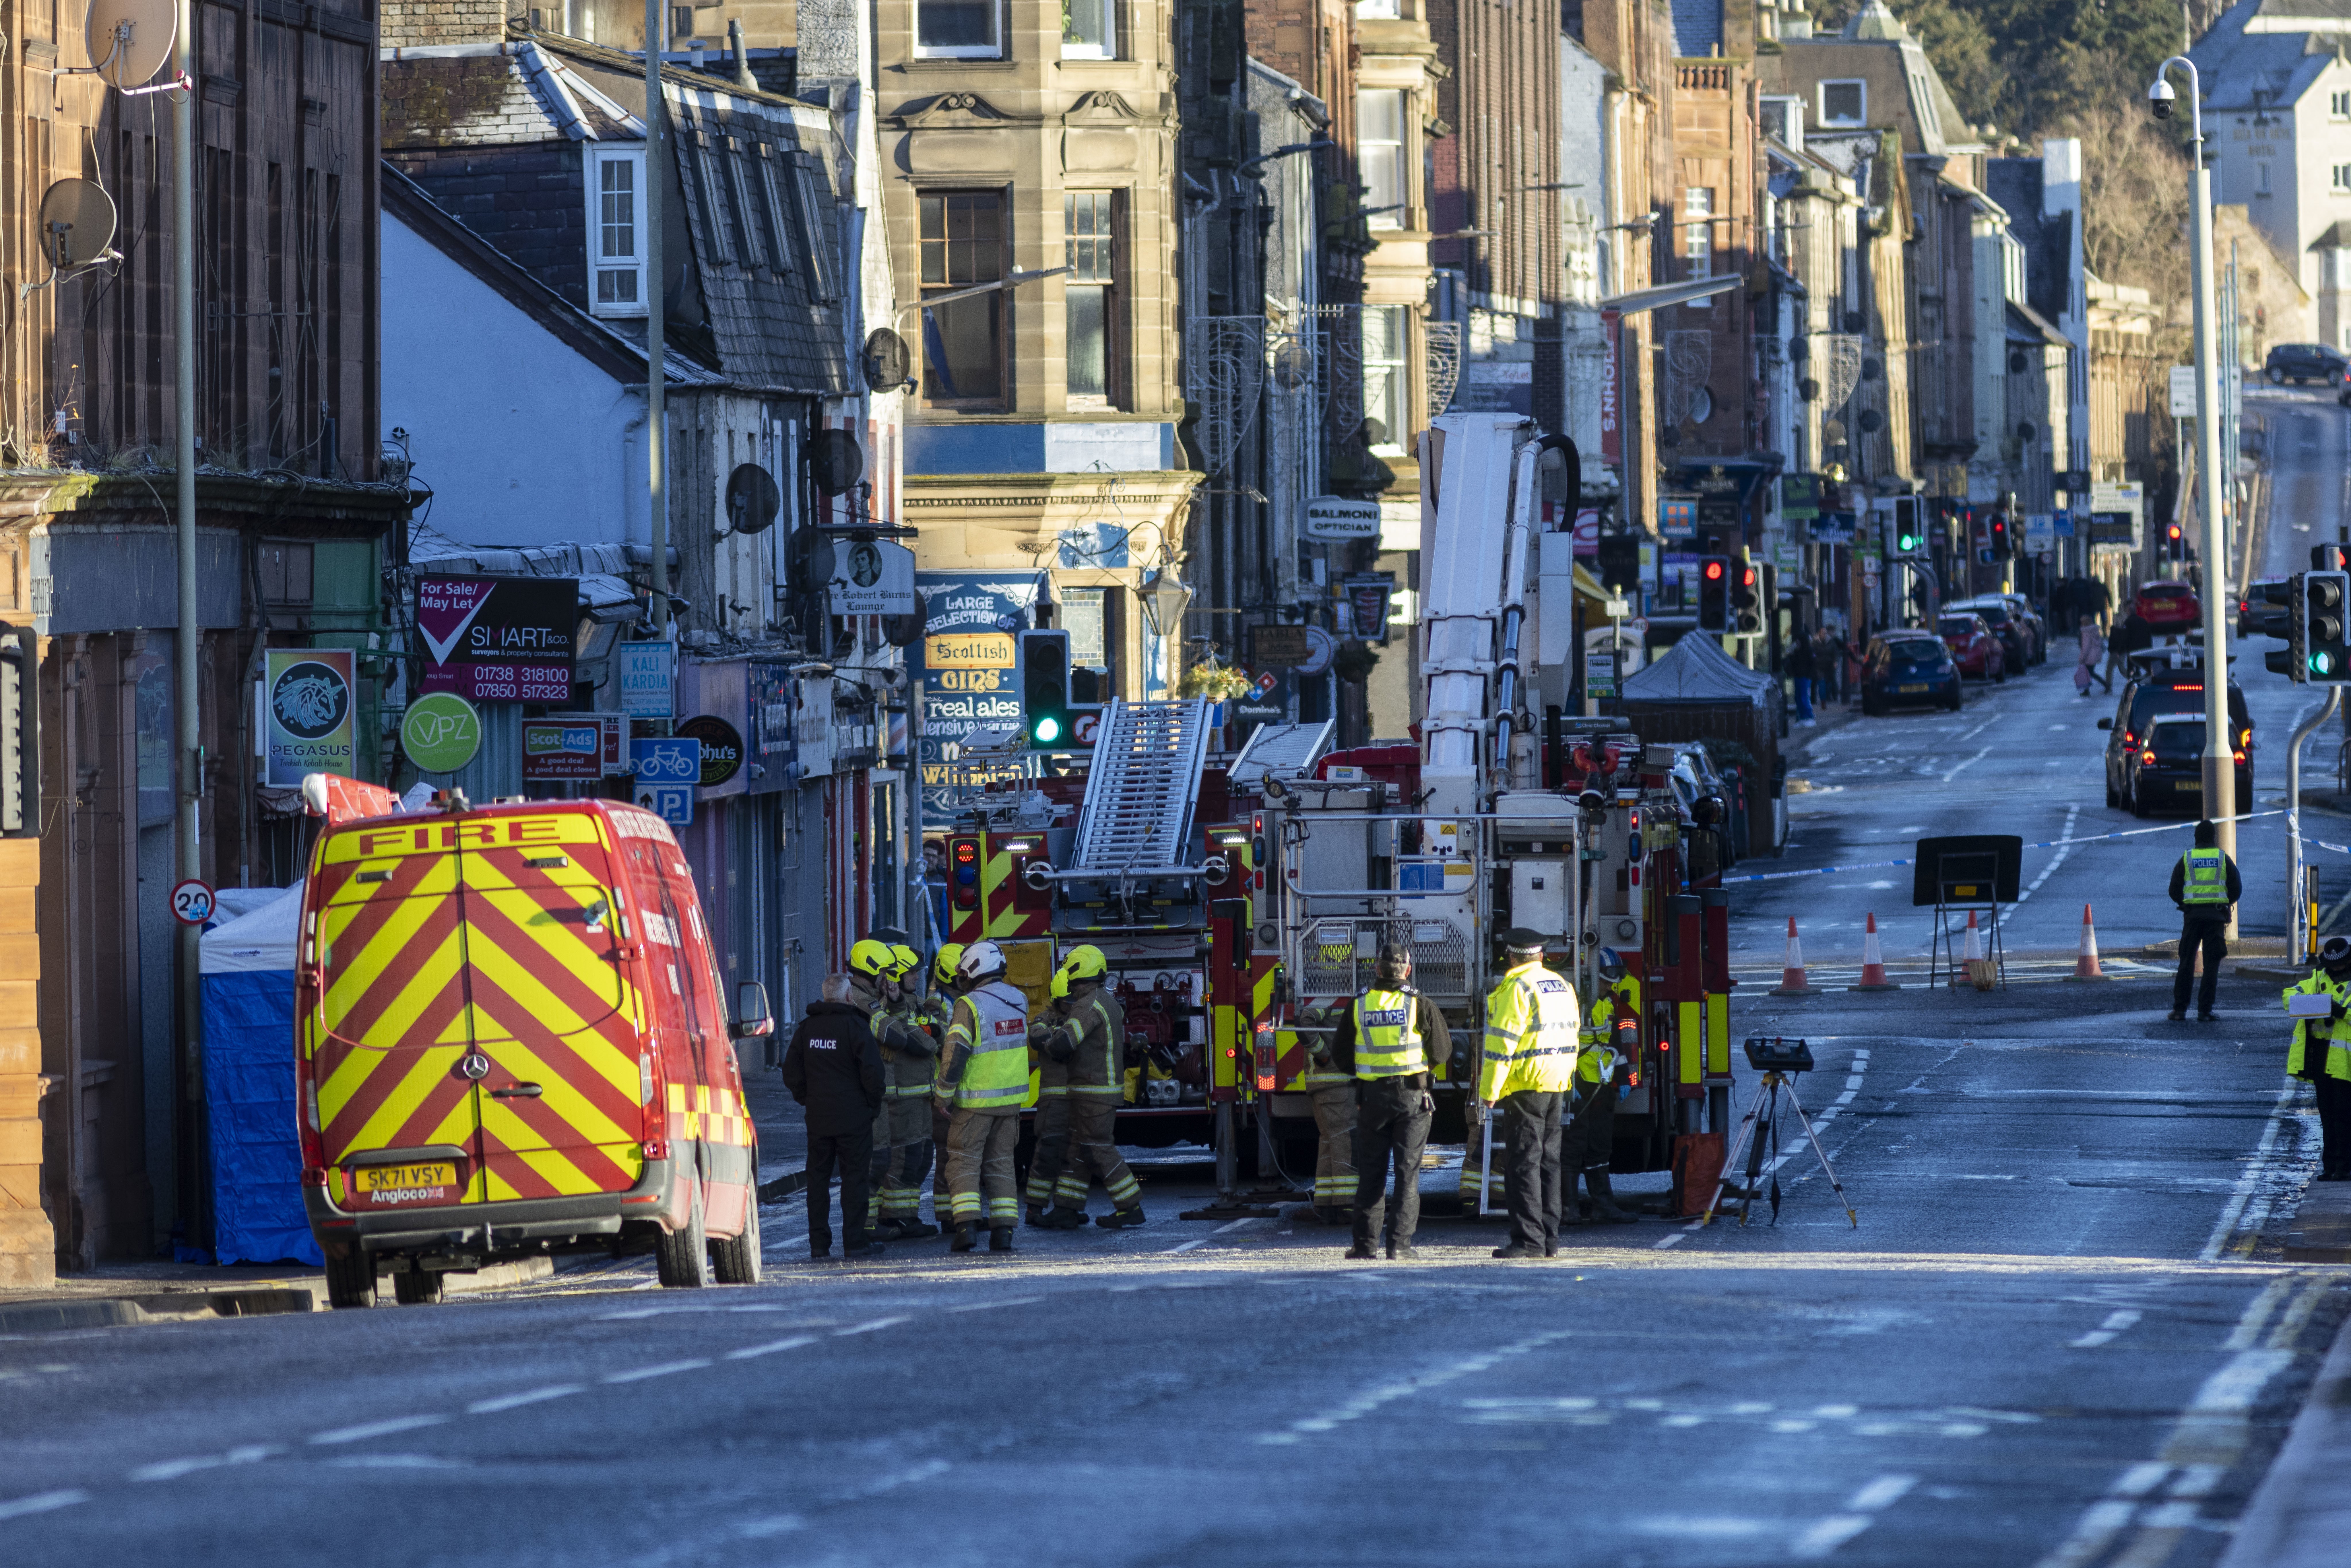 Dozens of firefighters tackled the fire in Perth, Scotland